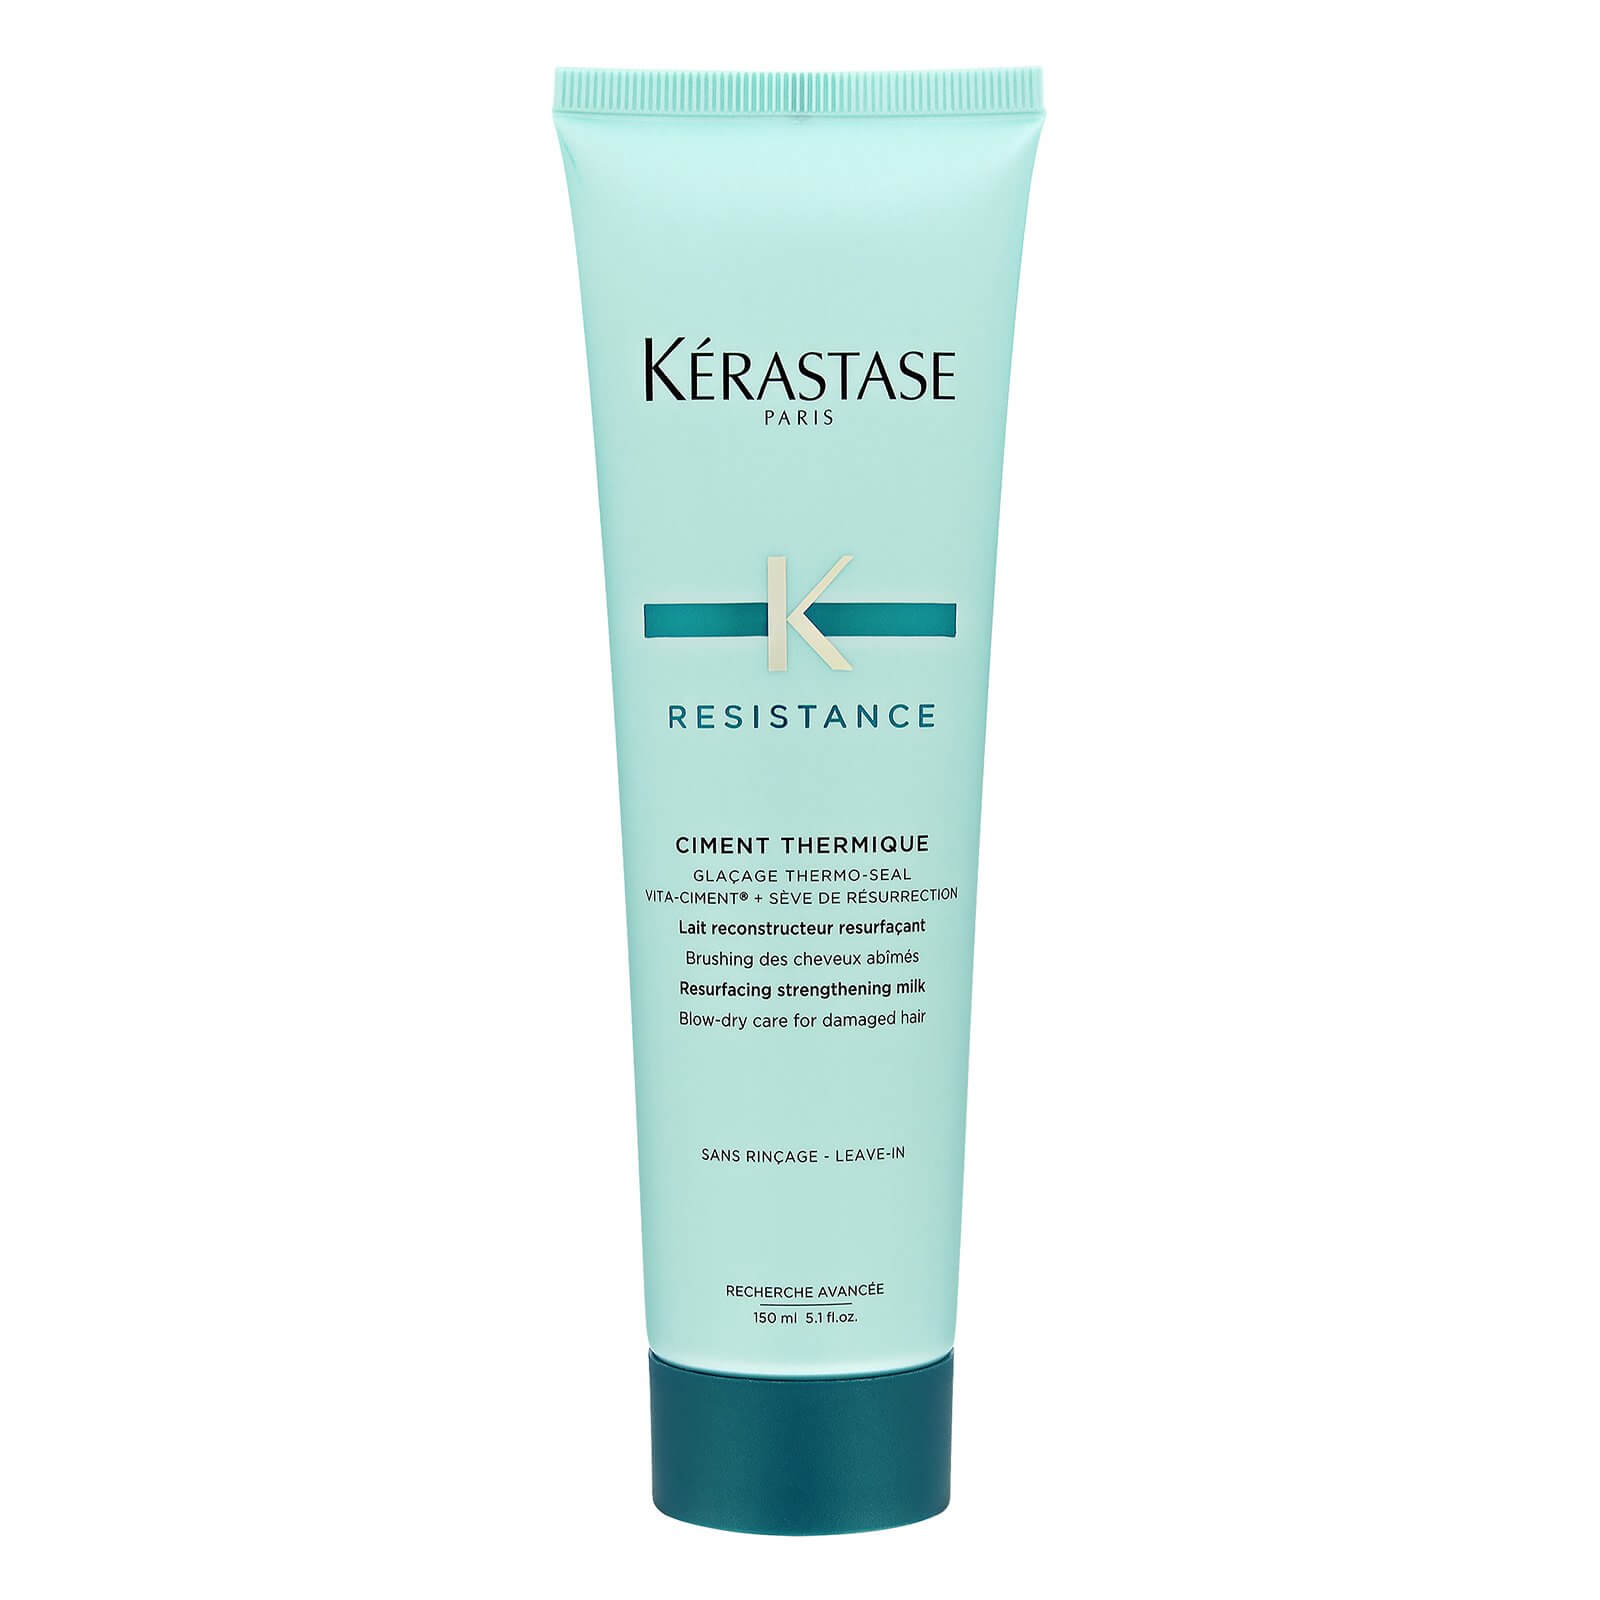 Resistance Ciment Thermique Resurfacing Strengthening Milk Blow-Dry Care (For Damaged Hair) 